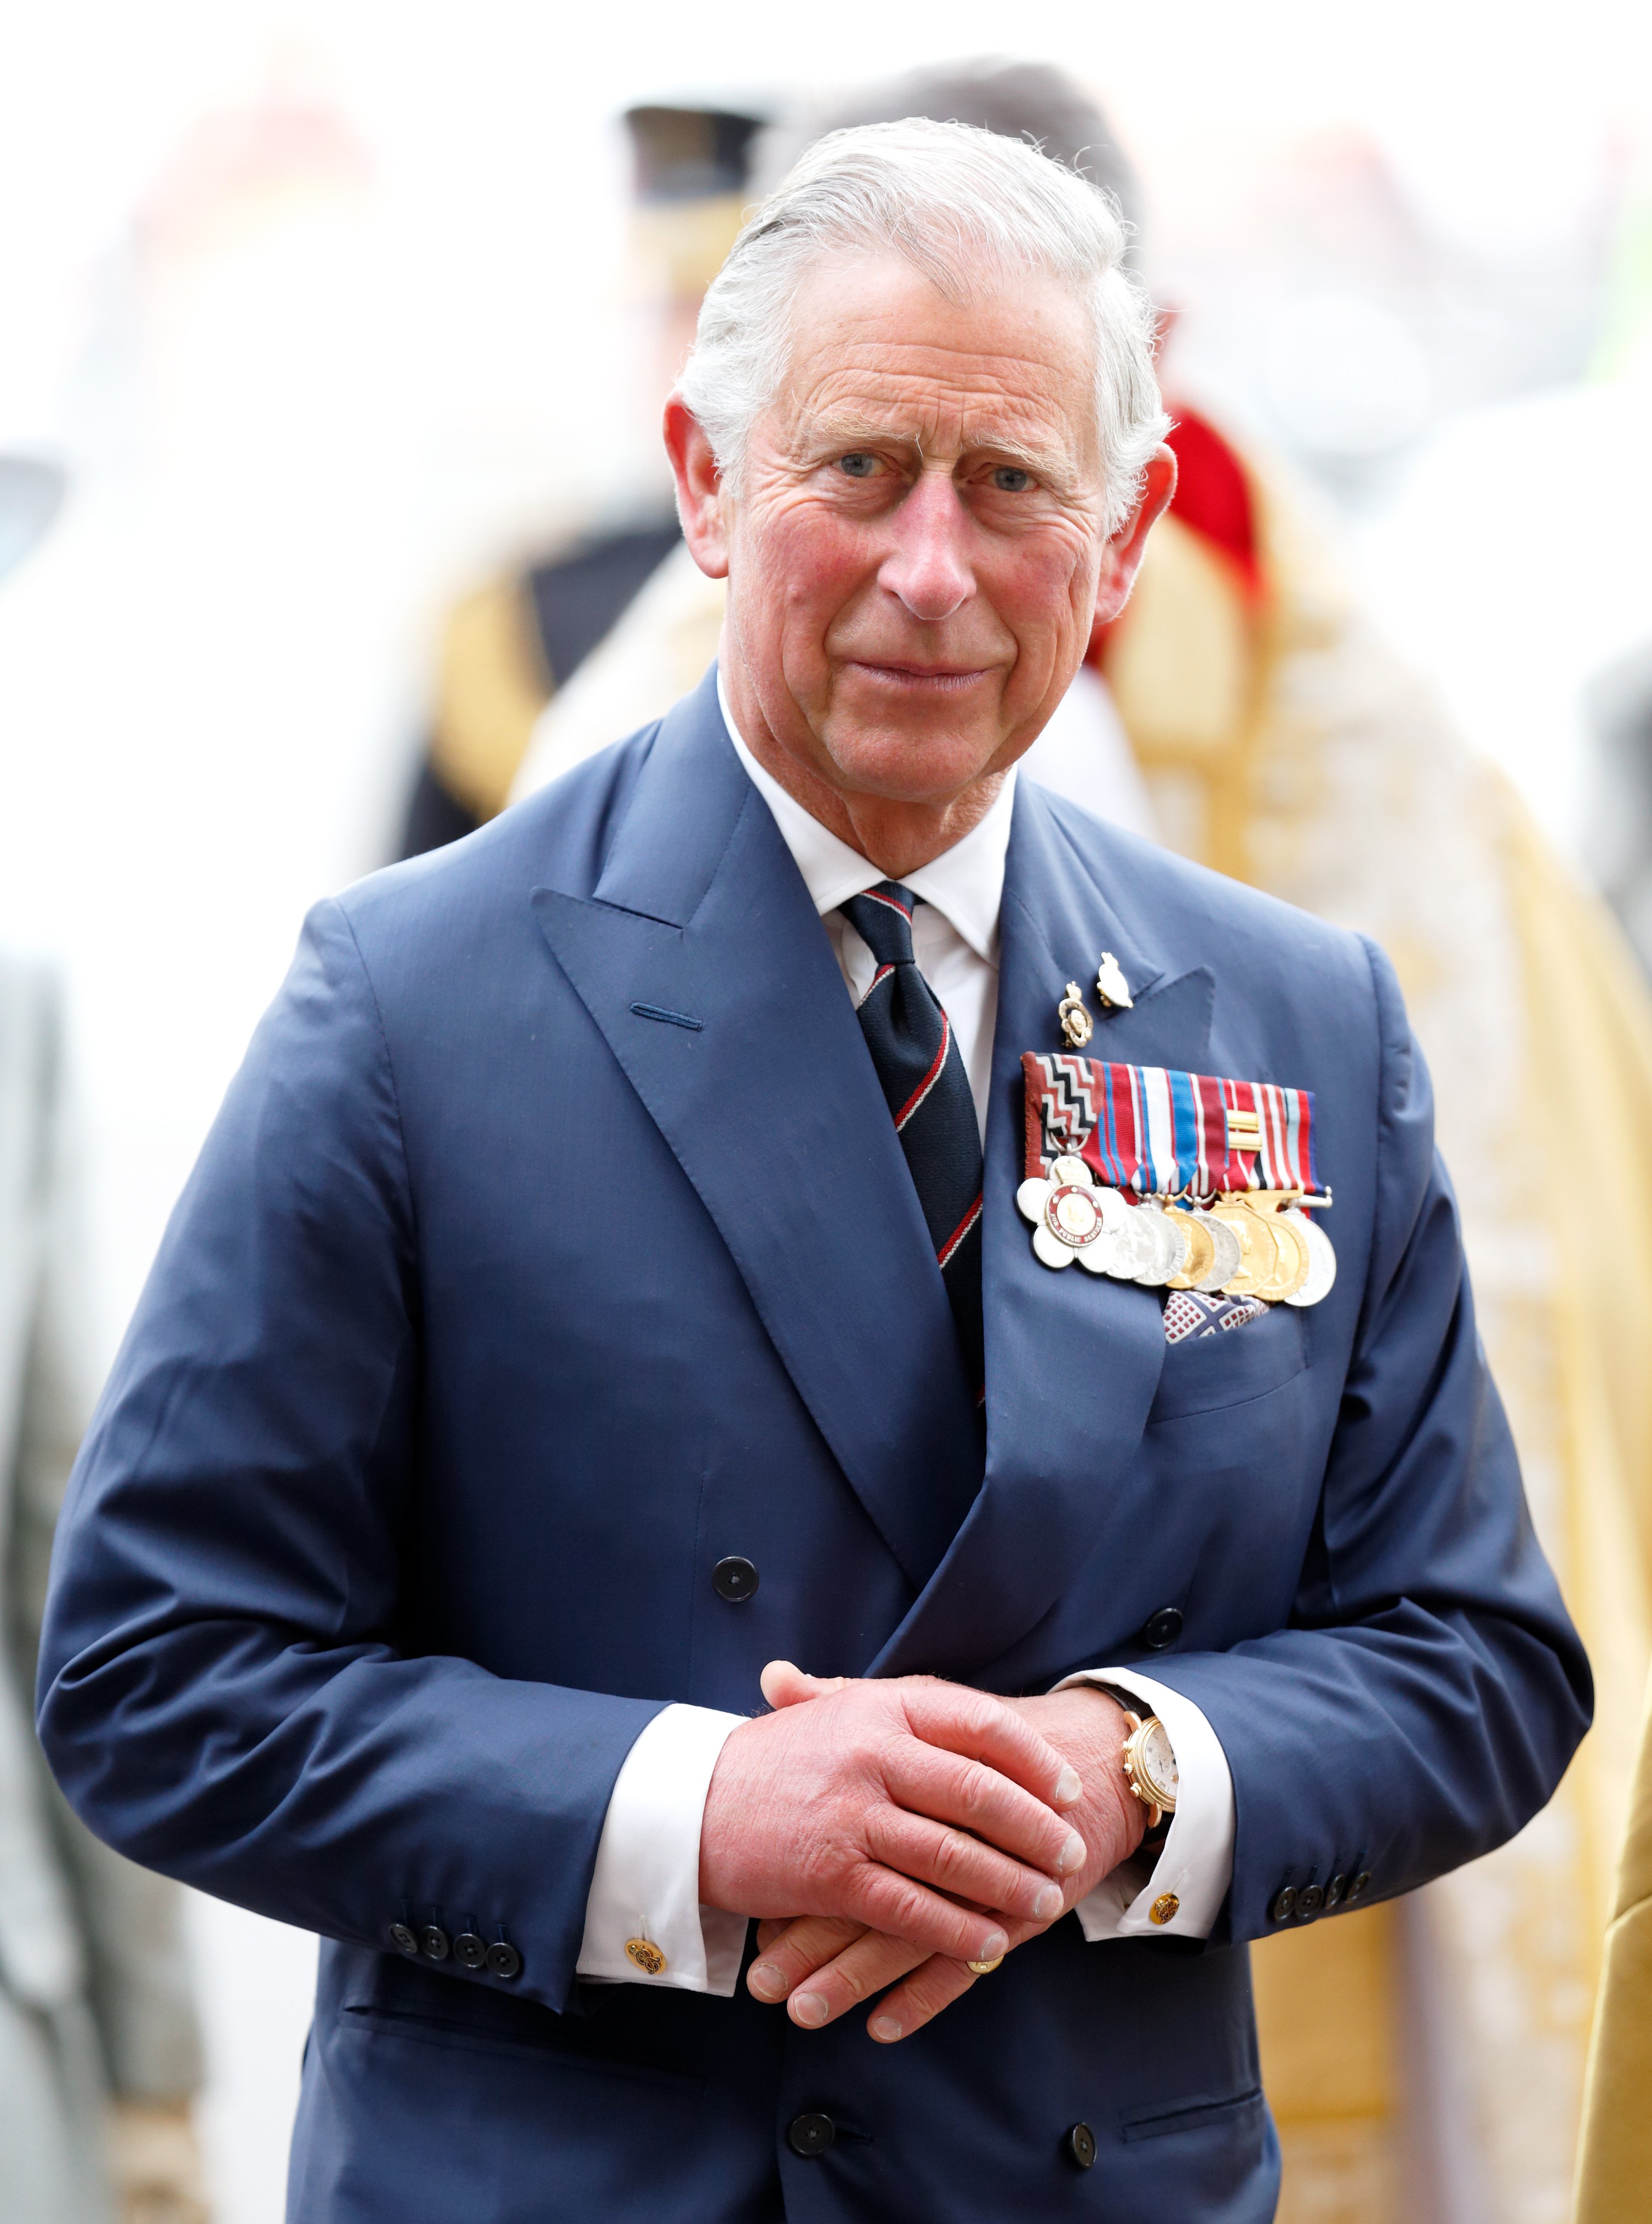 Prince Charles, Prince of Wales attends a Service of Thanksgiving to mark the 70th Anniversary of VE Day at Westminster Abbey on May 10, 2015, in London, England. | Source: Getty Images.